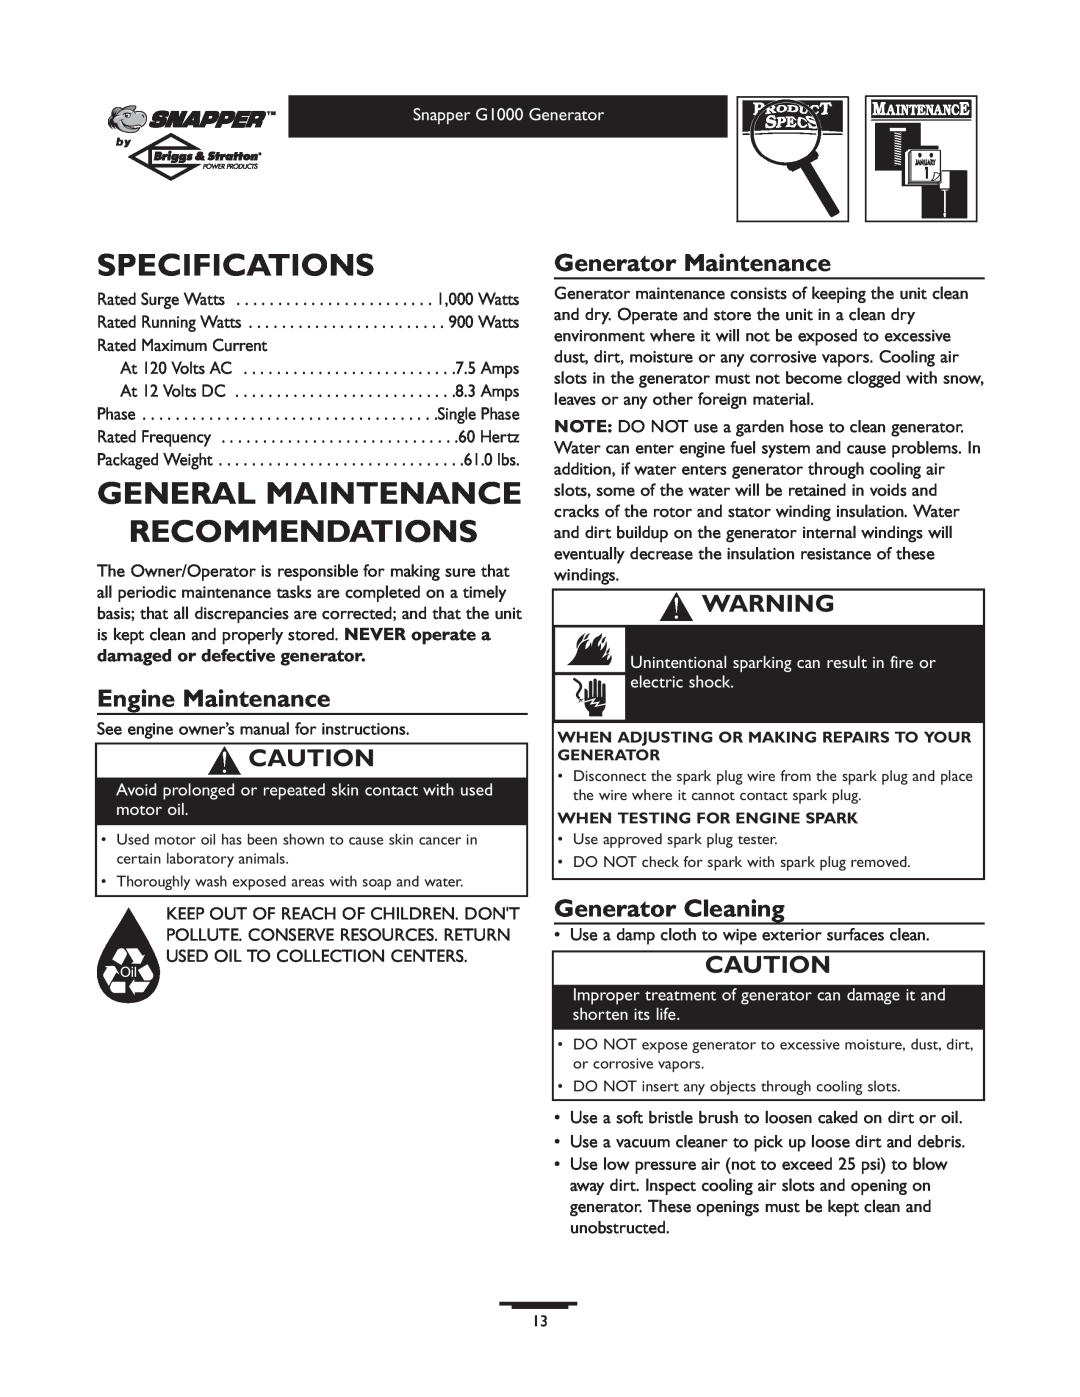 Snapper G1000 owner manual Specifications, General Maintenance Recommendations, Engine Maintenance, Generator Maintenance 